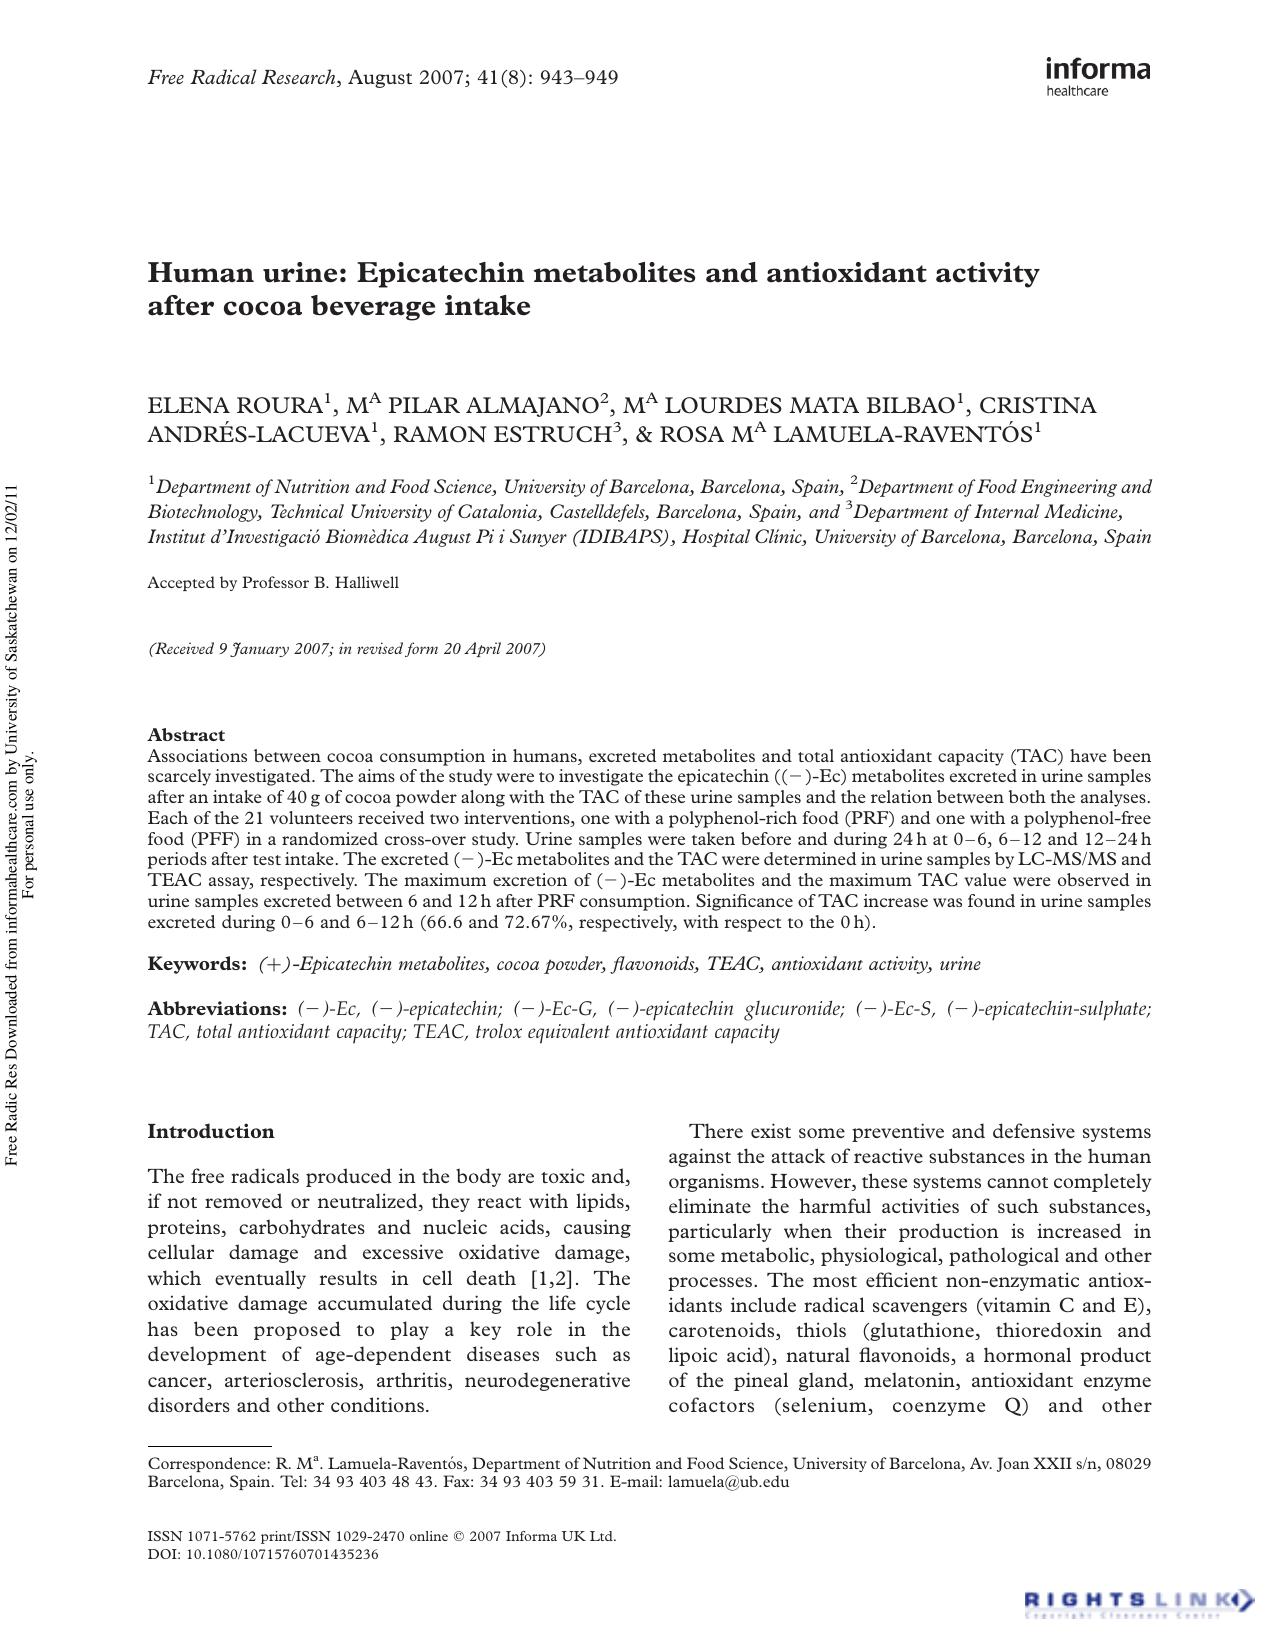 Human urine: Epicatechin metabolites and antioxidant activity after cocoa beverage intake by unknow